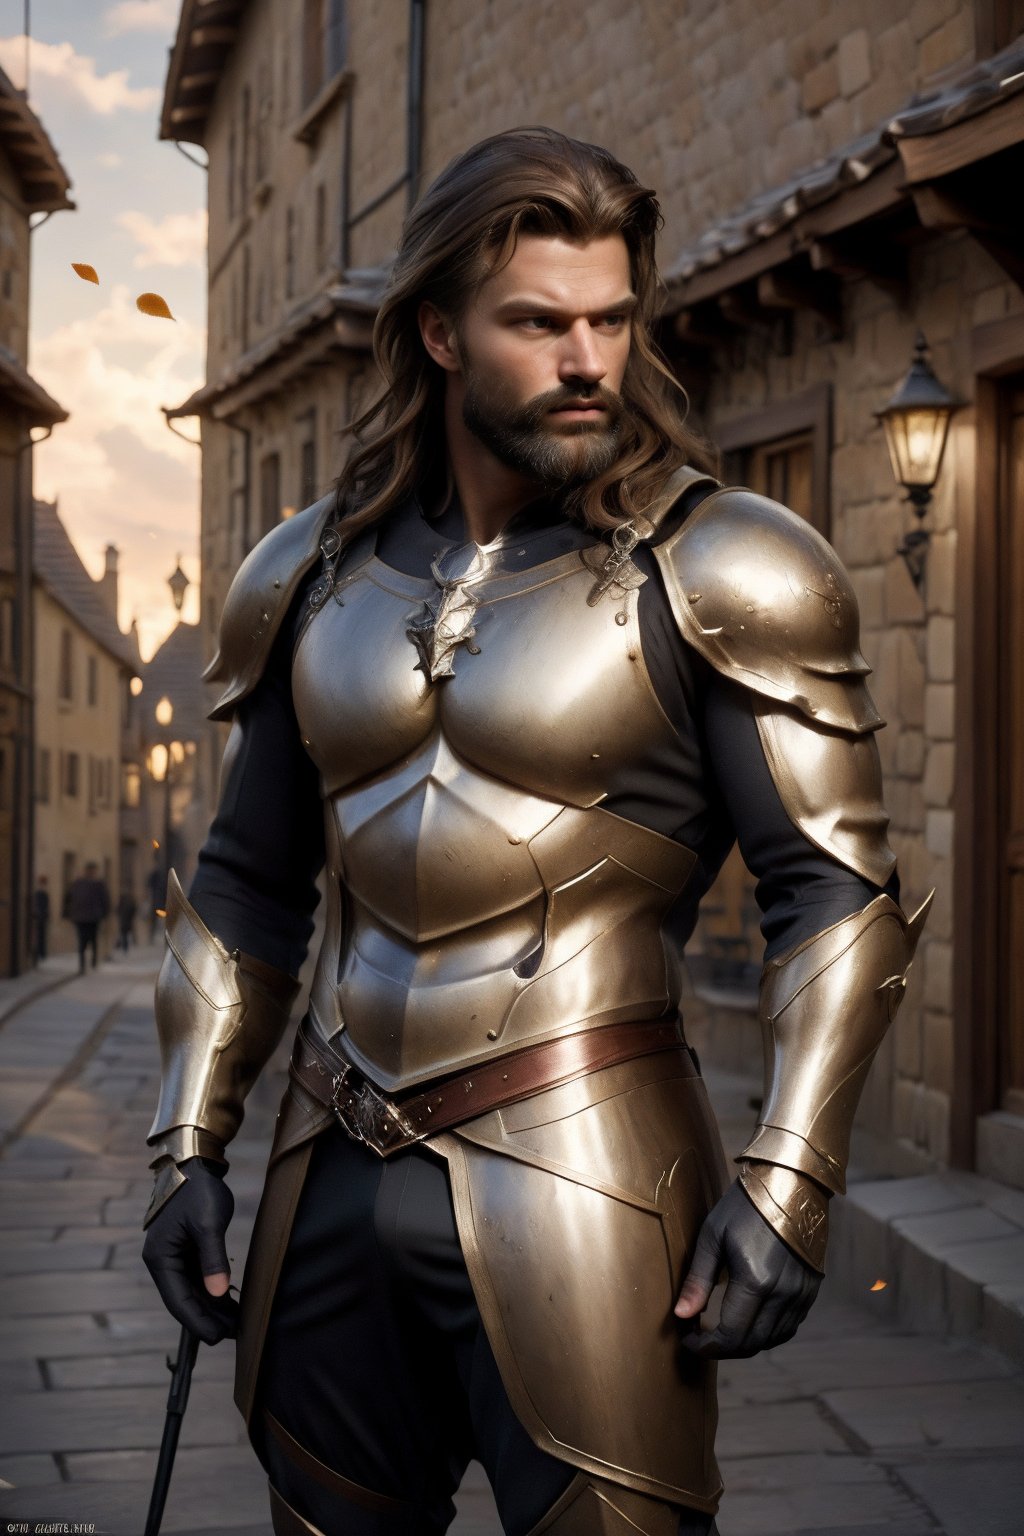 Tristan, the gallant knight, stands resolute against a serene medieval village backdrop, spring's gentle warmth illuminating his well-rendered armor and brown locks. Whiskers framing his chiseled features, 'jaeggernawt' exudes firm focus as he assumes a dramatic pose, pale complexion aglow with an intense softglow. Delicate petals fall softly in the background, while the camera's dynamic view captures the poetic, romantic essence of this masterpiece. Source Filmmaker (SFM) renders this UHD image in vivid, classic realism.,jaeggernawt